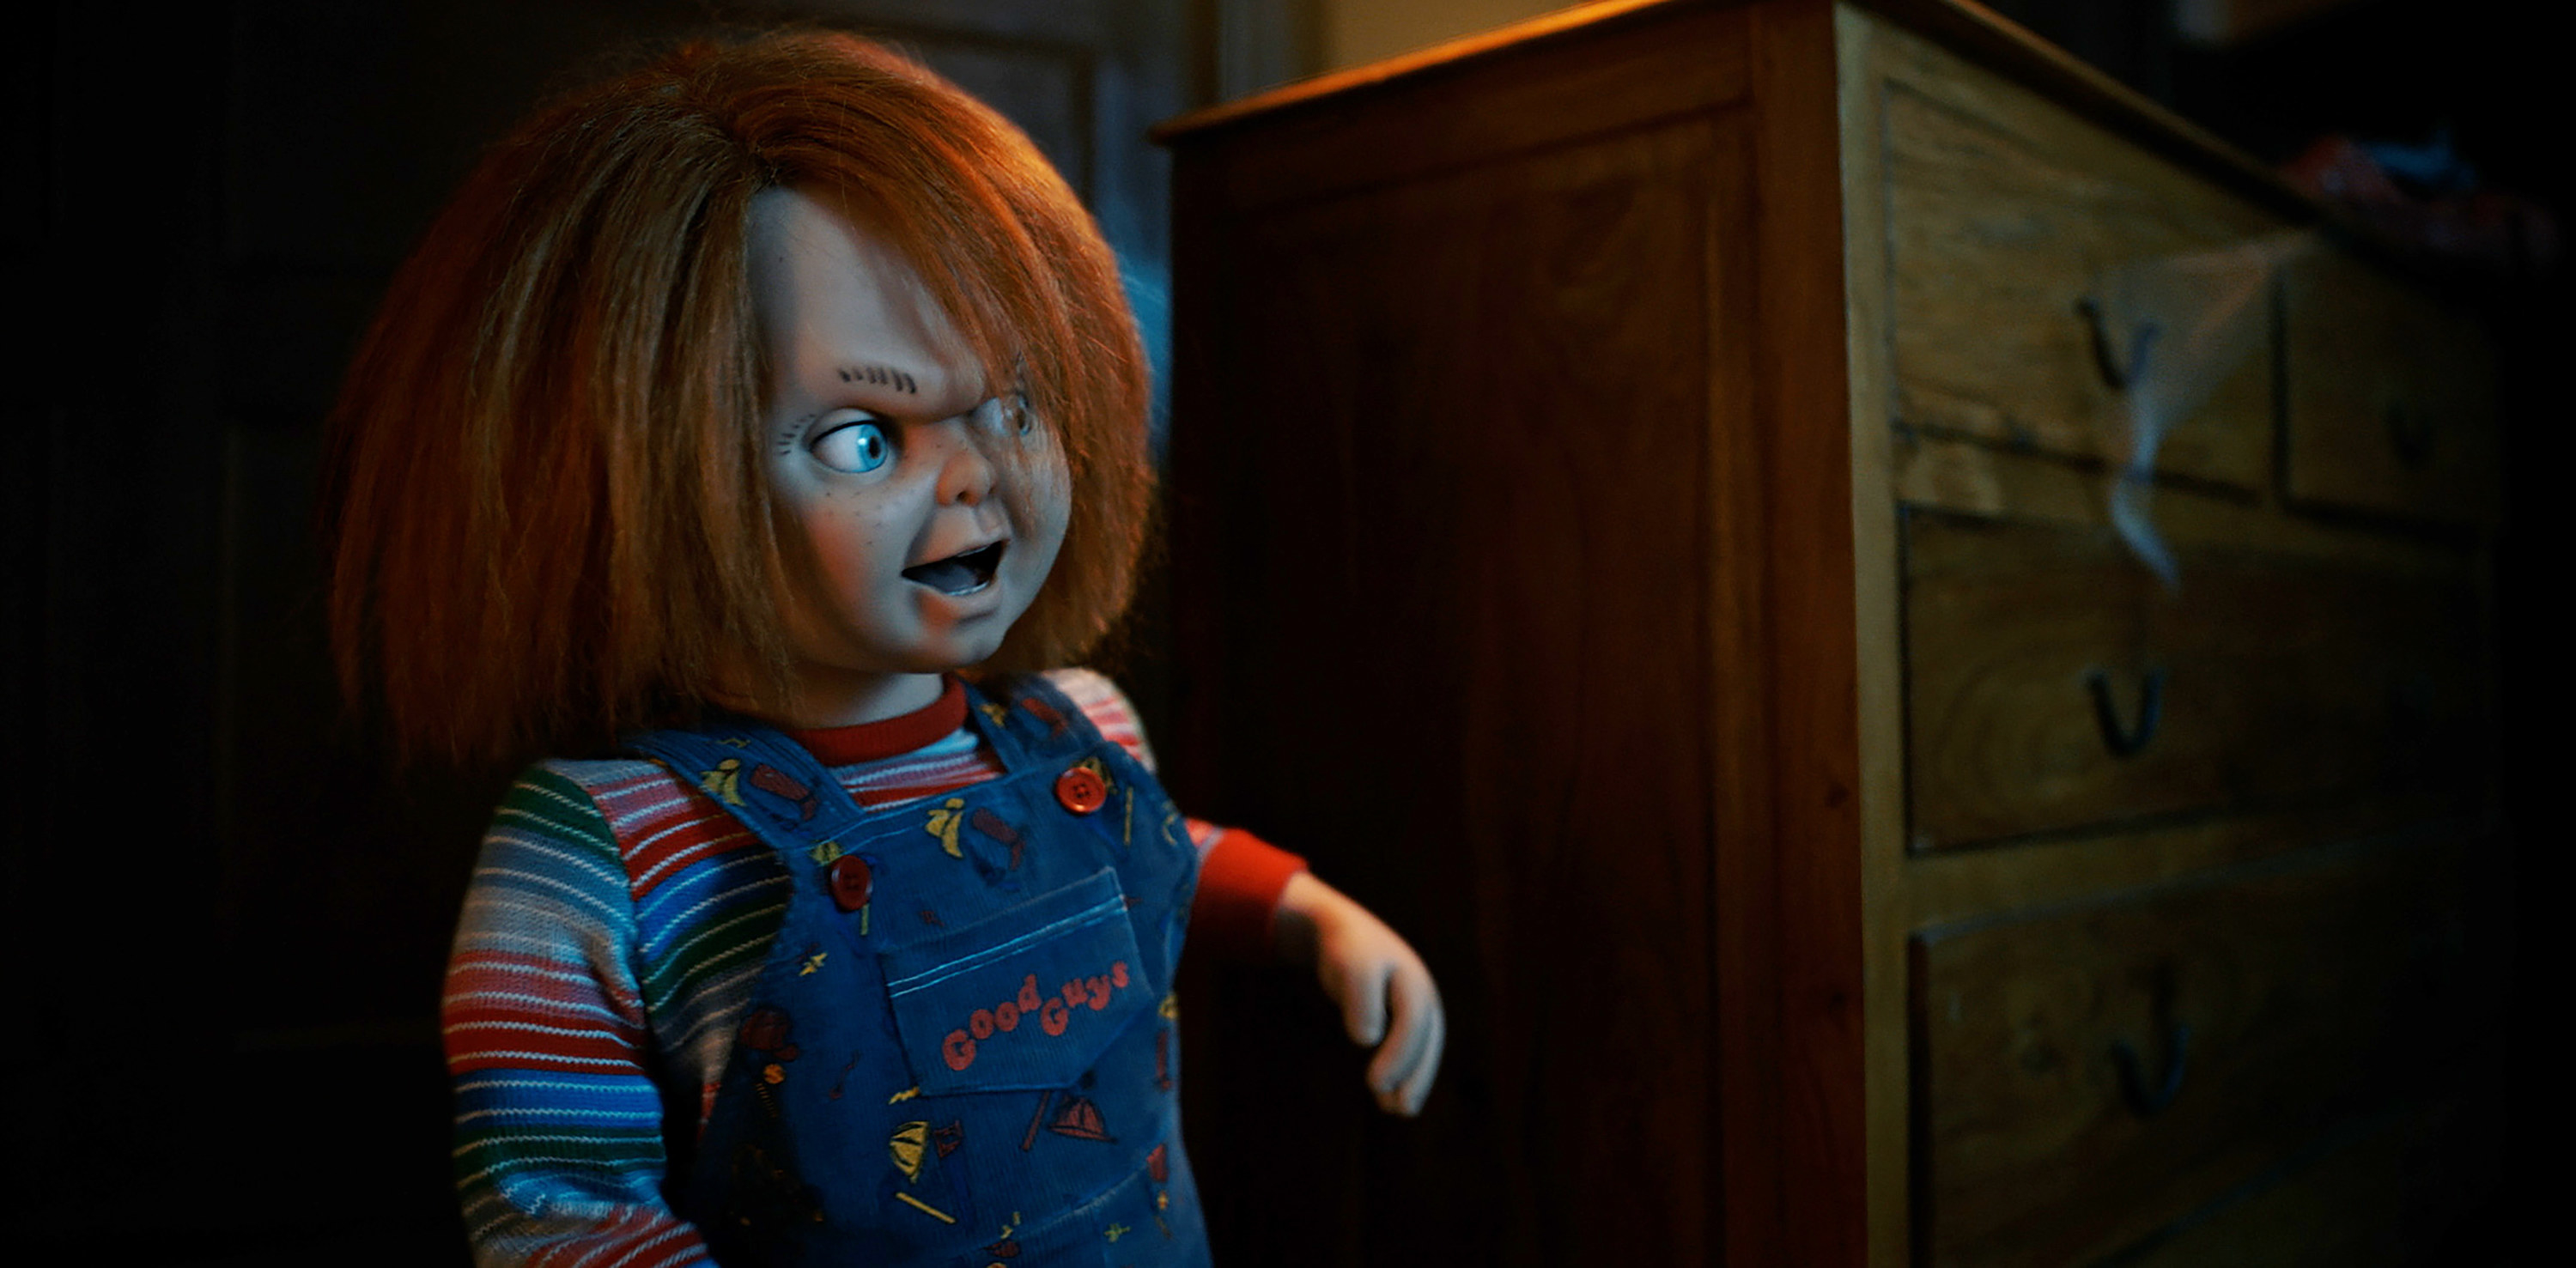 A screengrab of Chucky the doll